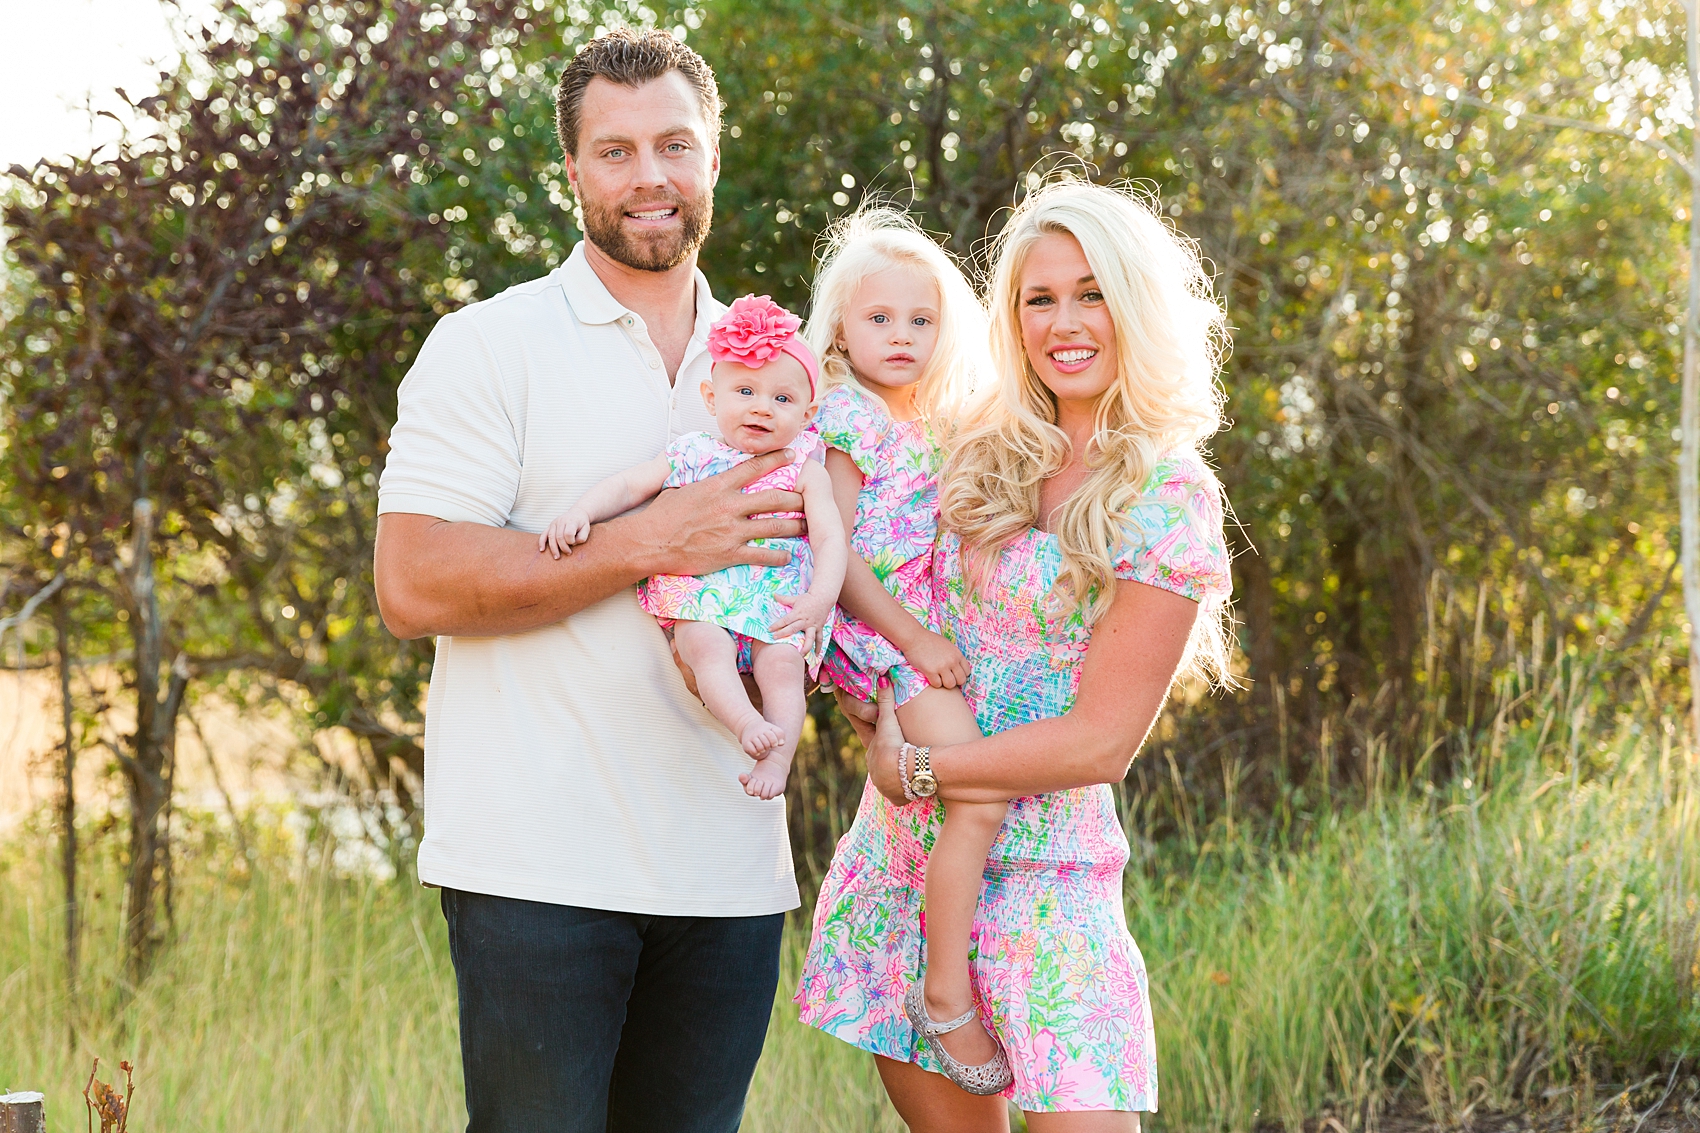 Leah Hope Photography | Salt Lake City Park City Utah Family Photos | Green Nature Mountain Views Backyard Fall Family Pictures | What to Wear | Family Posing Poses | Scottsdale Photographer | Family Child Photographer | Outfits and Styling Ideas | Family Photography | Matching Outfits